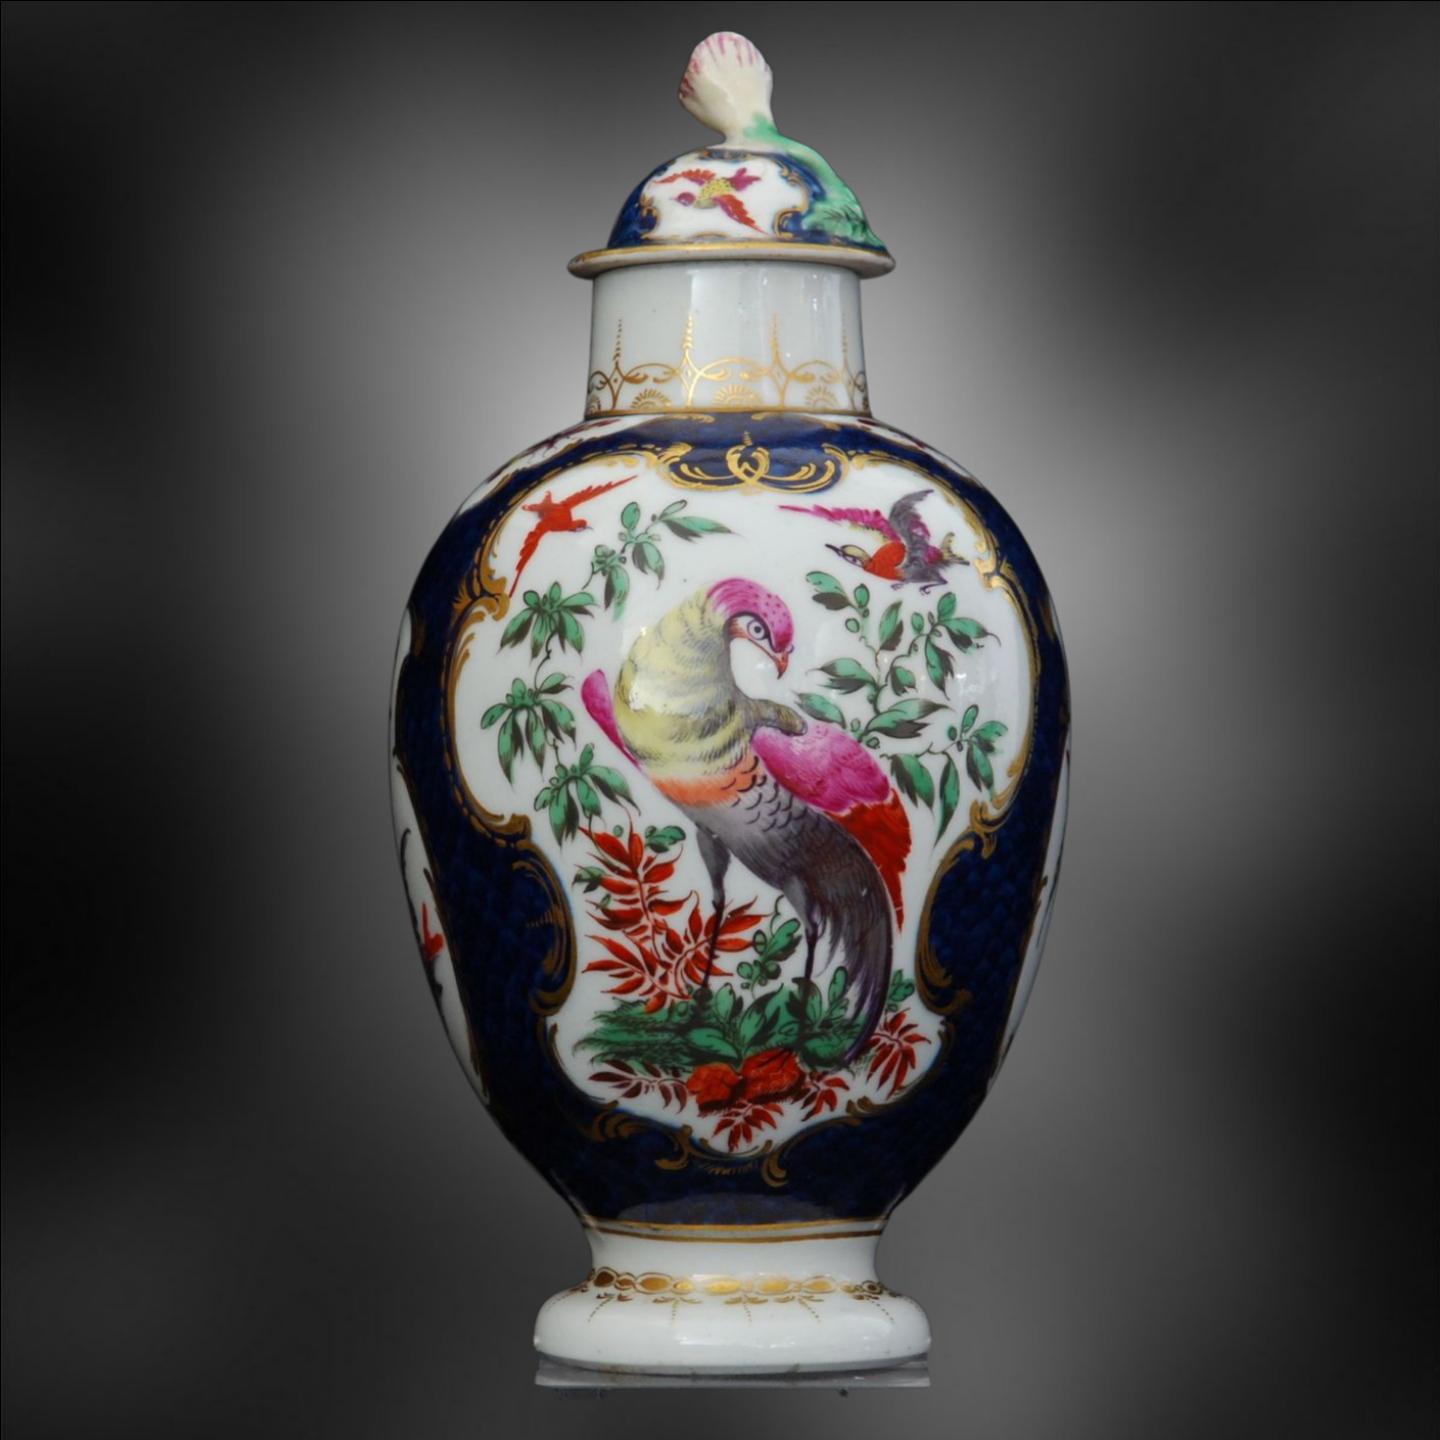 A small oviform tea canister, decorated with a scale blue ground and exotic birds and insects to the reserves.

Tea was a new, fashionable, and expensive drink at the time this was made. It would have been part of a large service, the pride of the